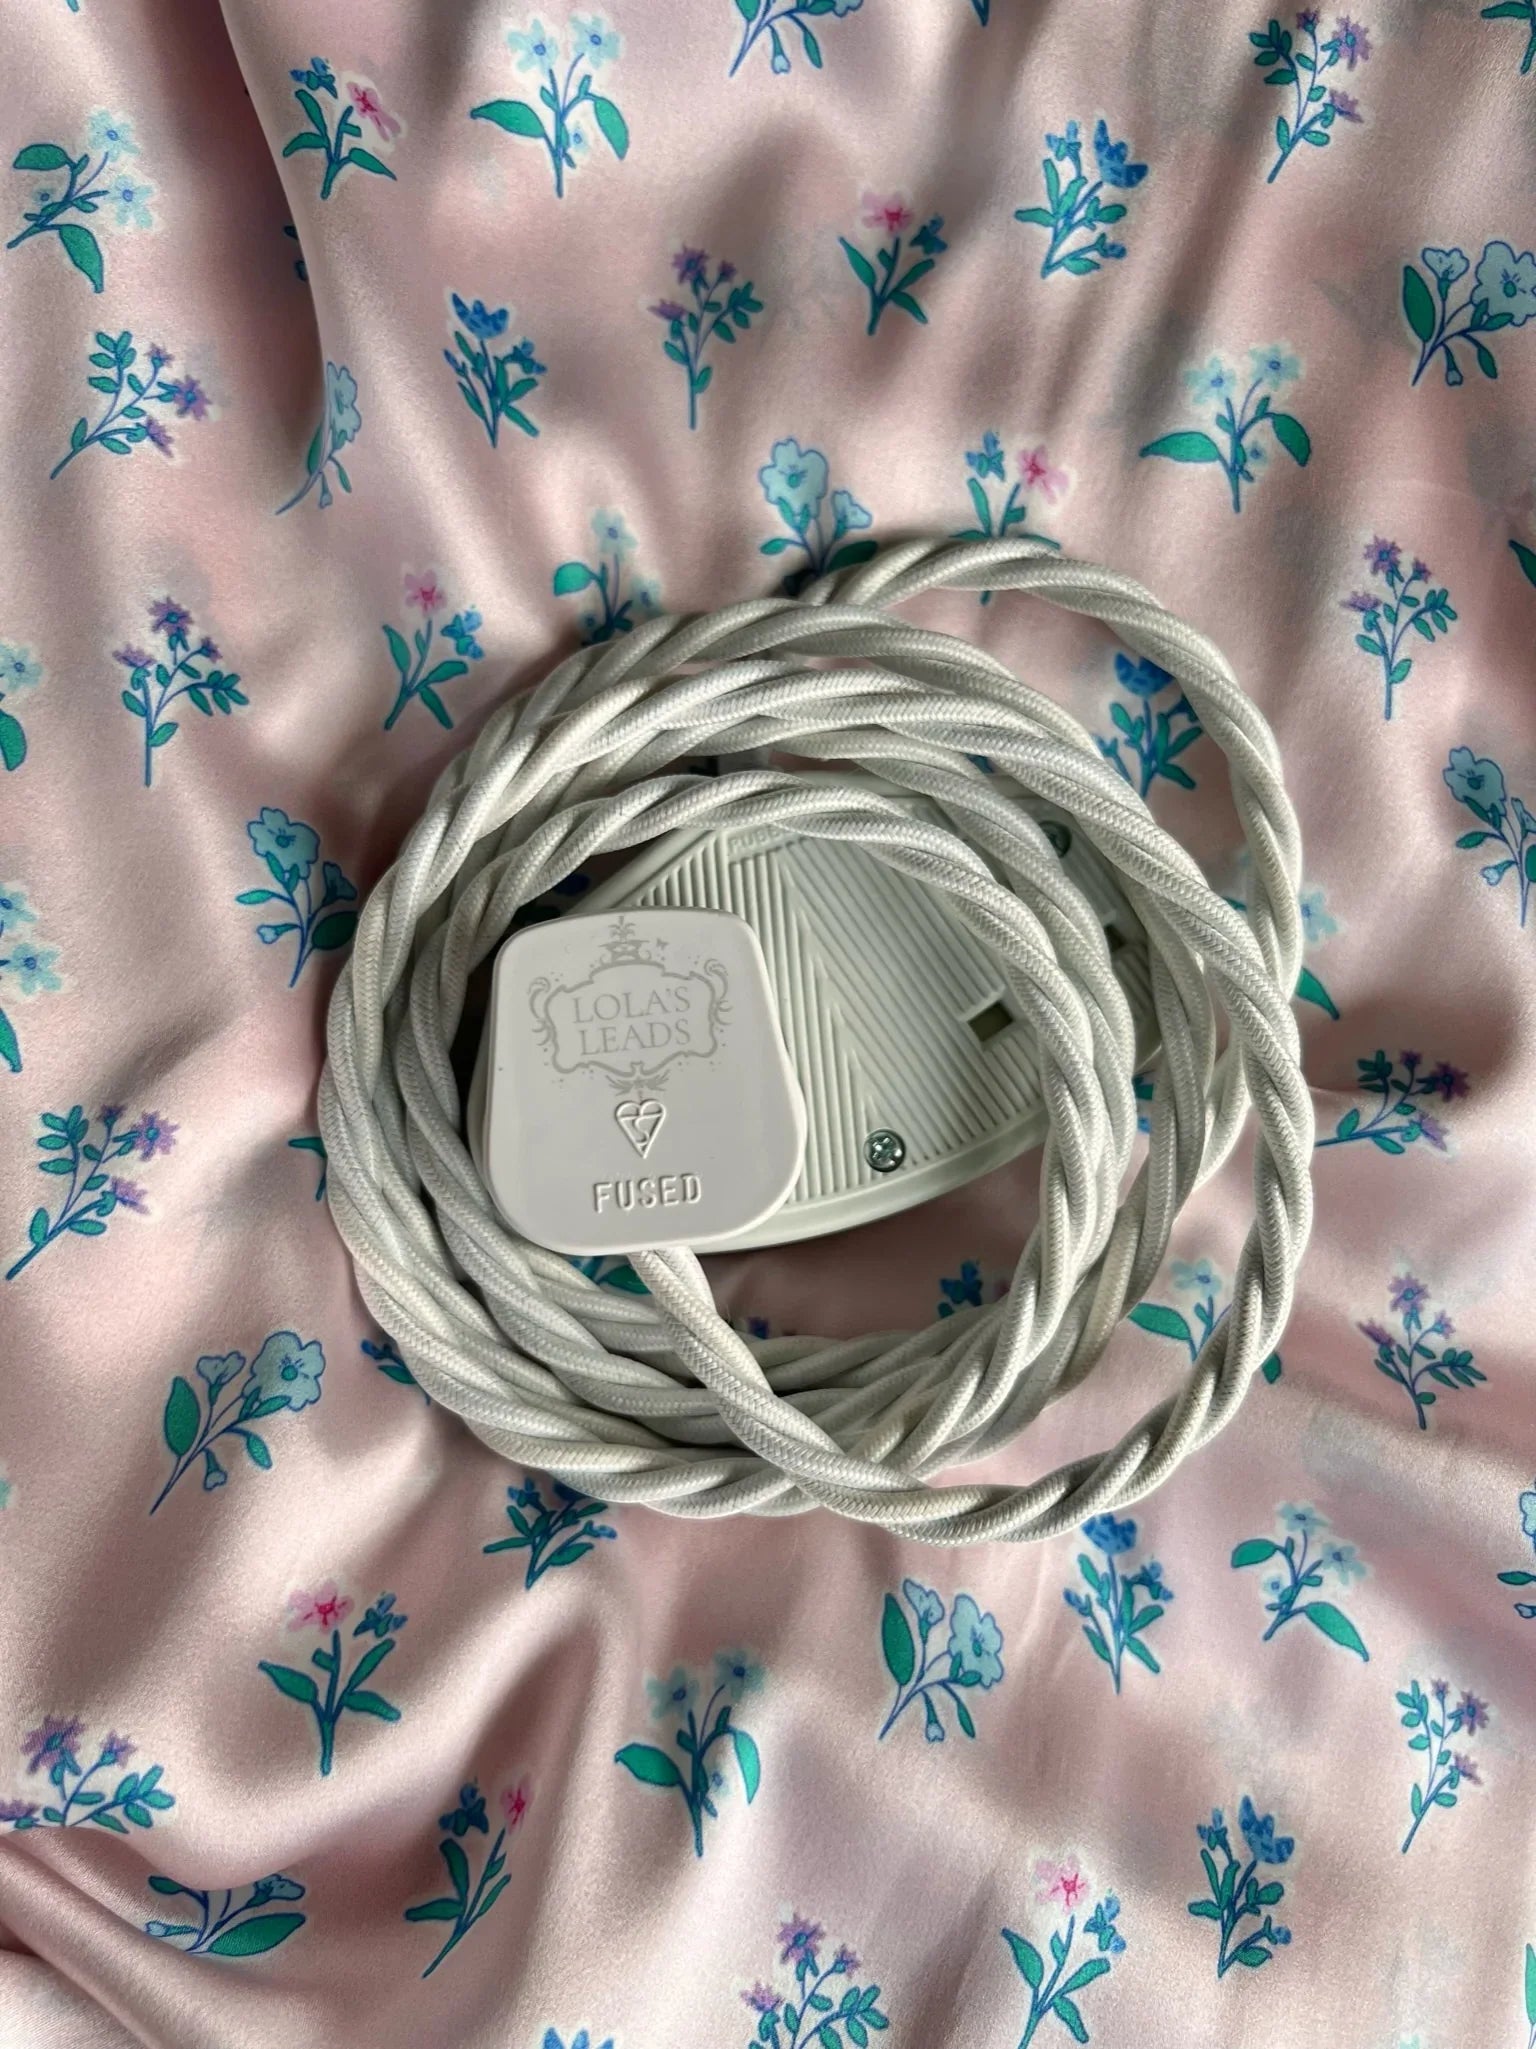 Lola's Leads Milk White Fabric Covered Extension Cable